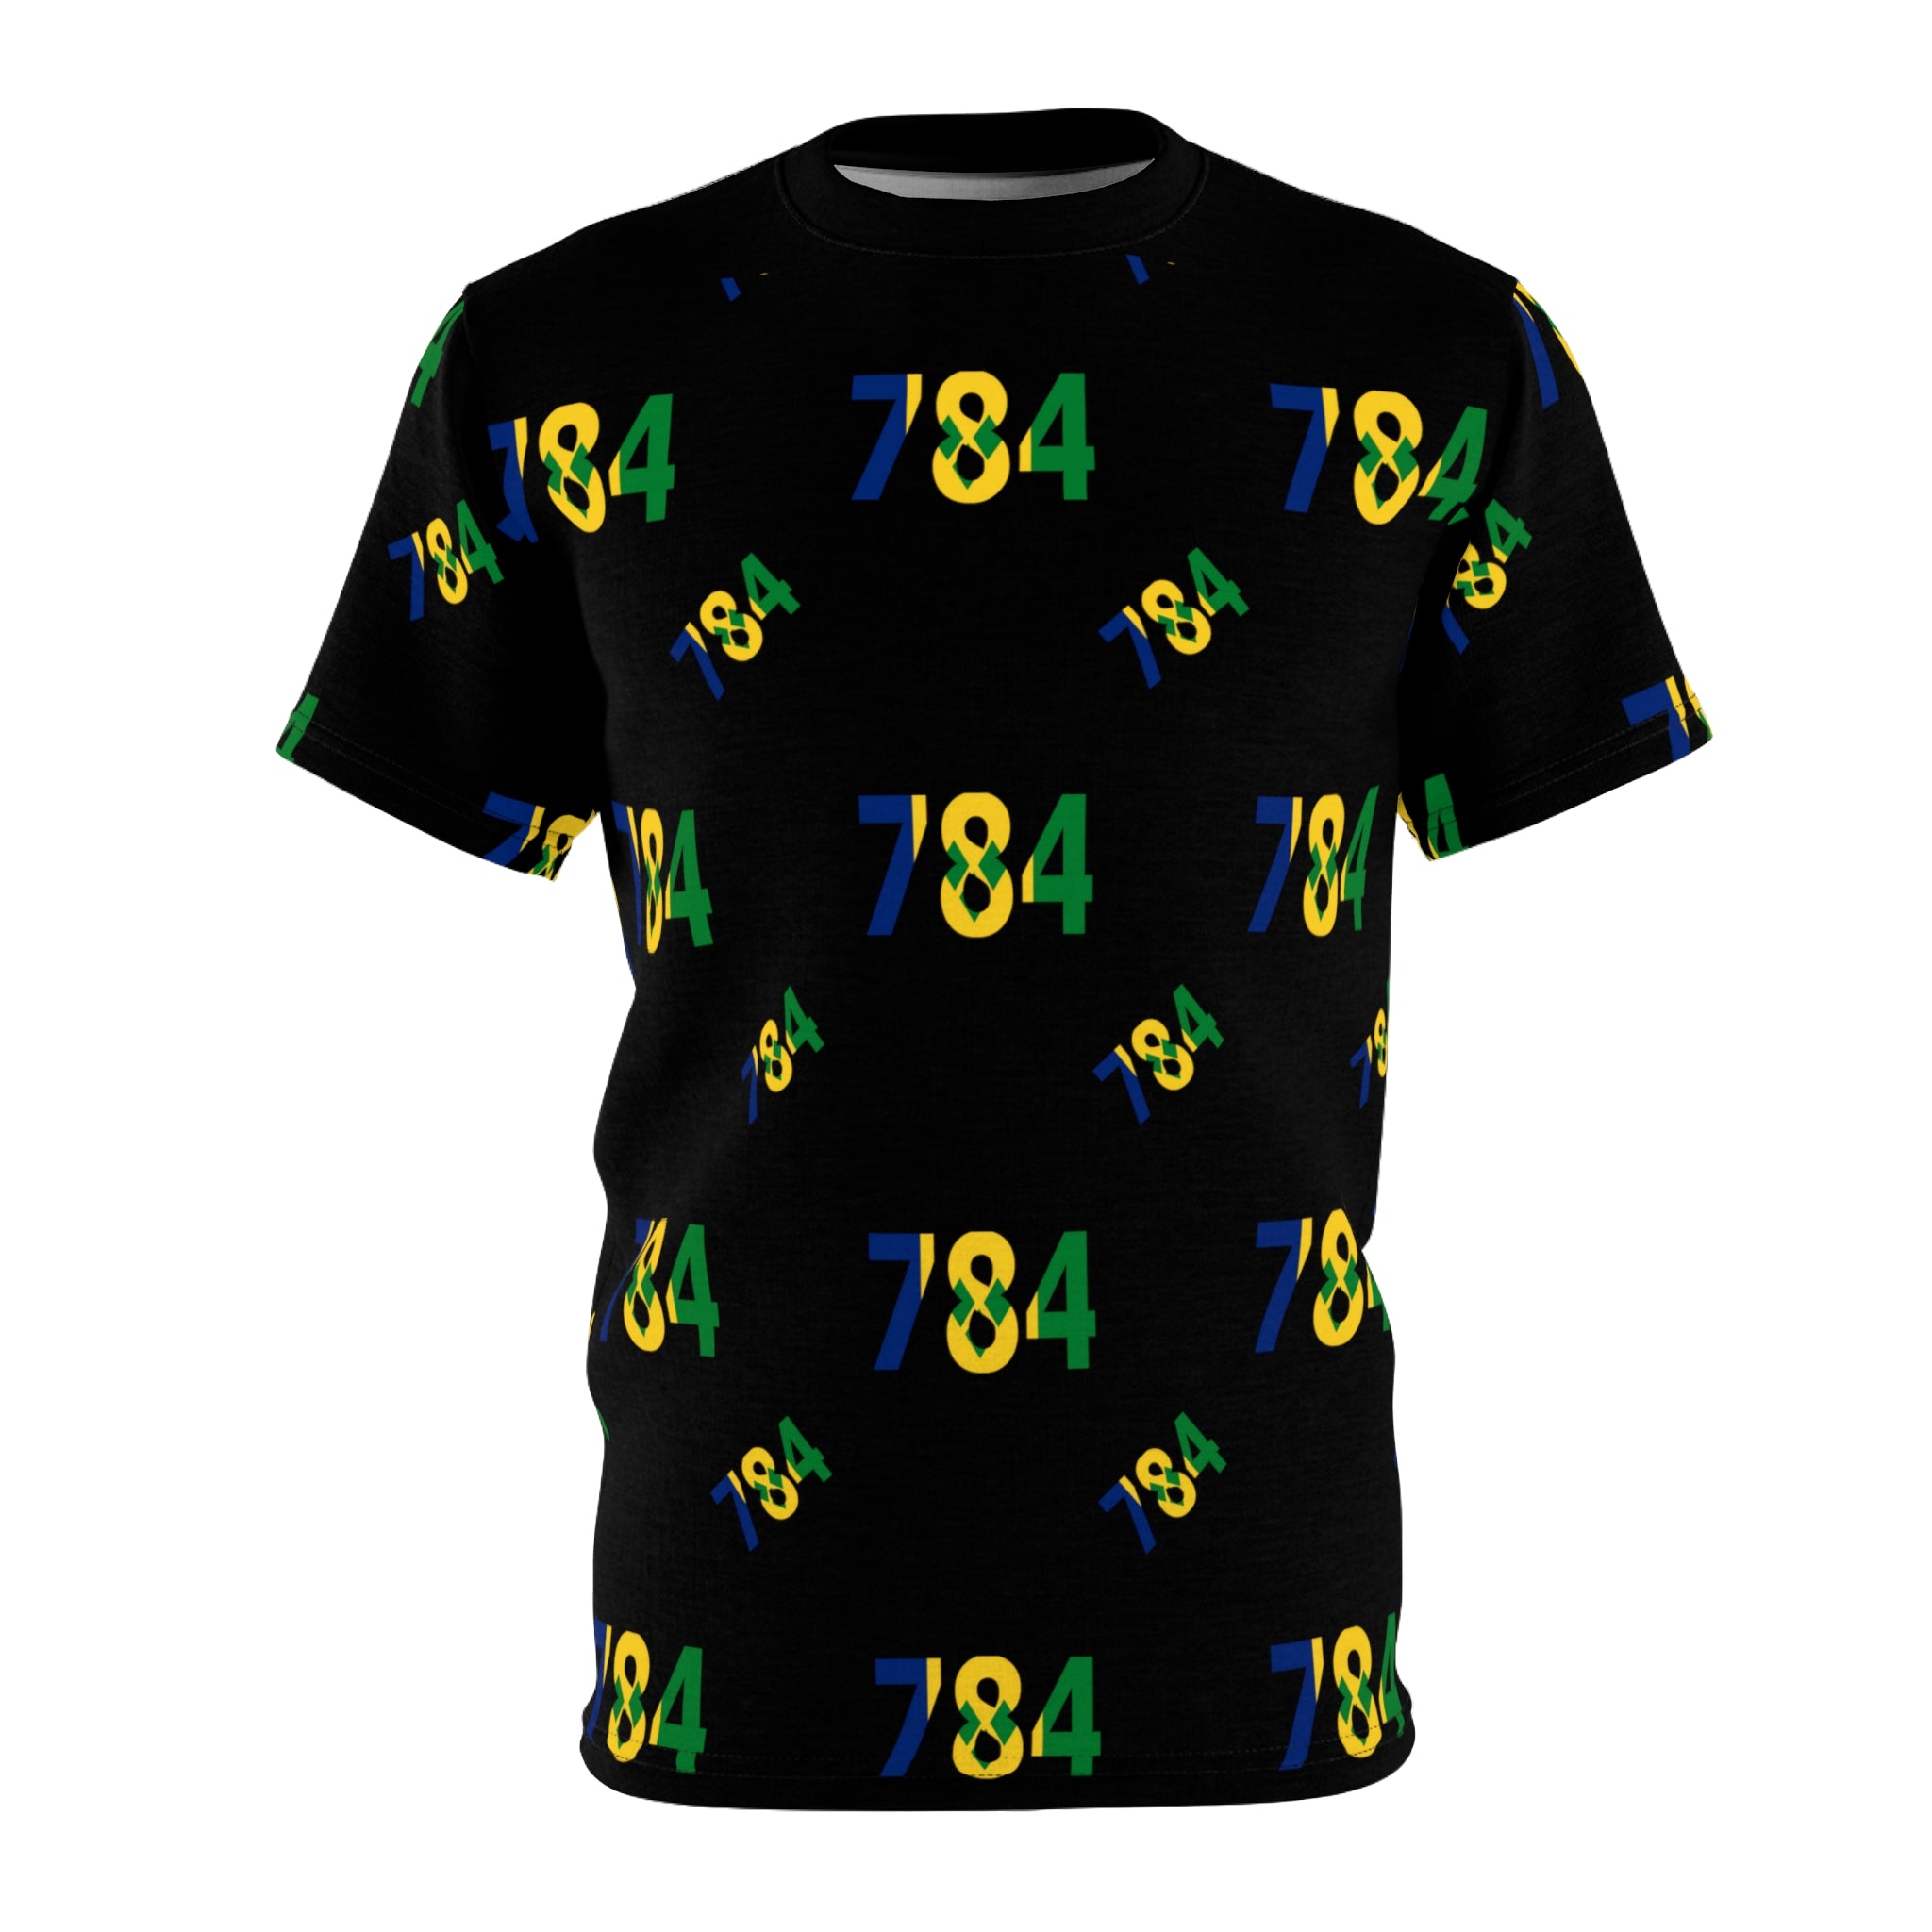 St. Vincent and the Grenadines Area Code 784 Unisex Tee (Black)